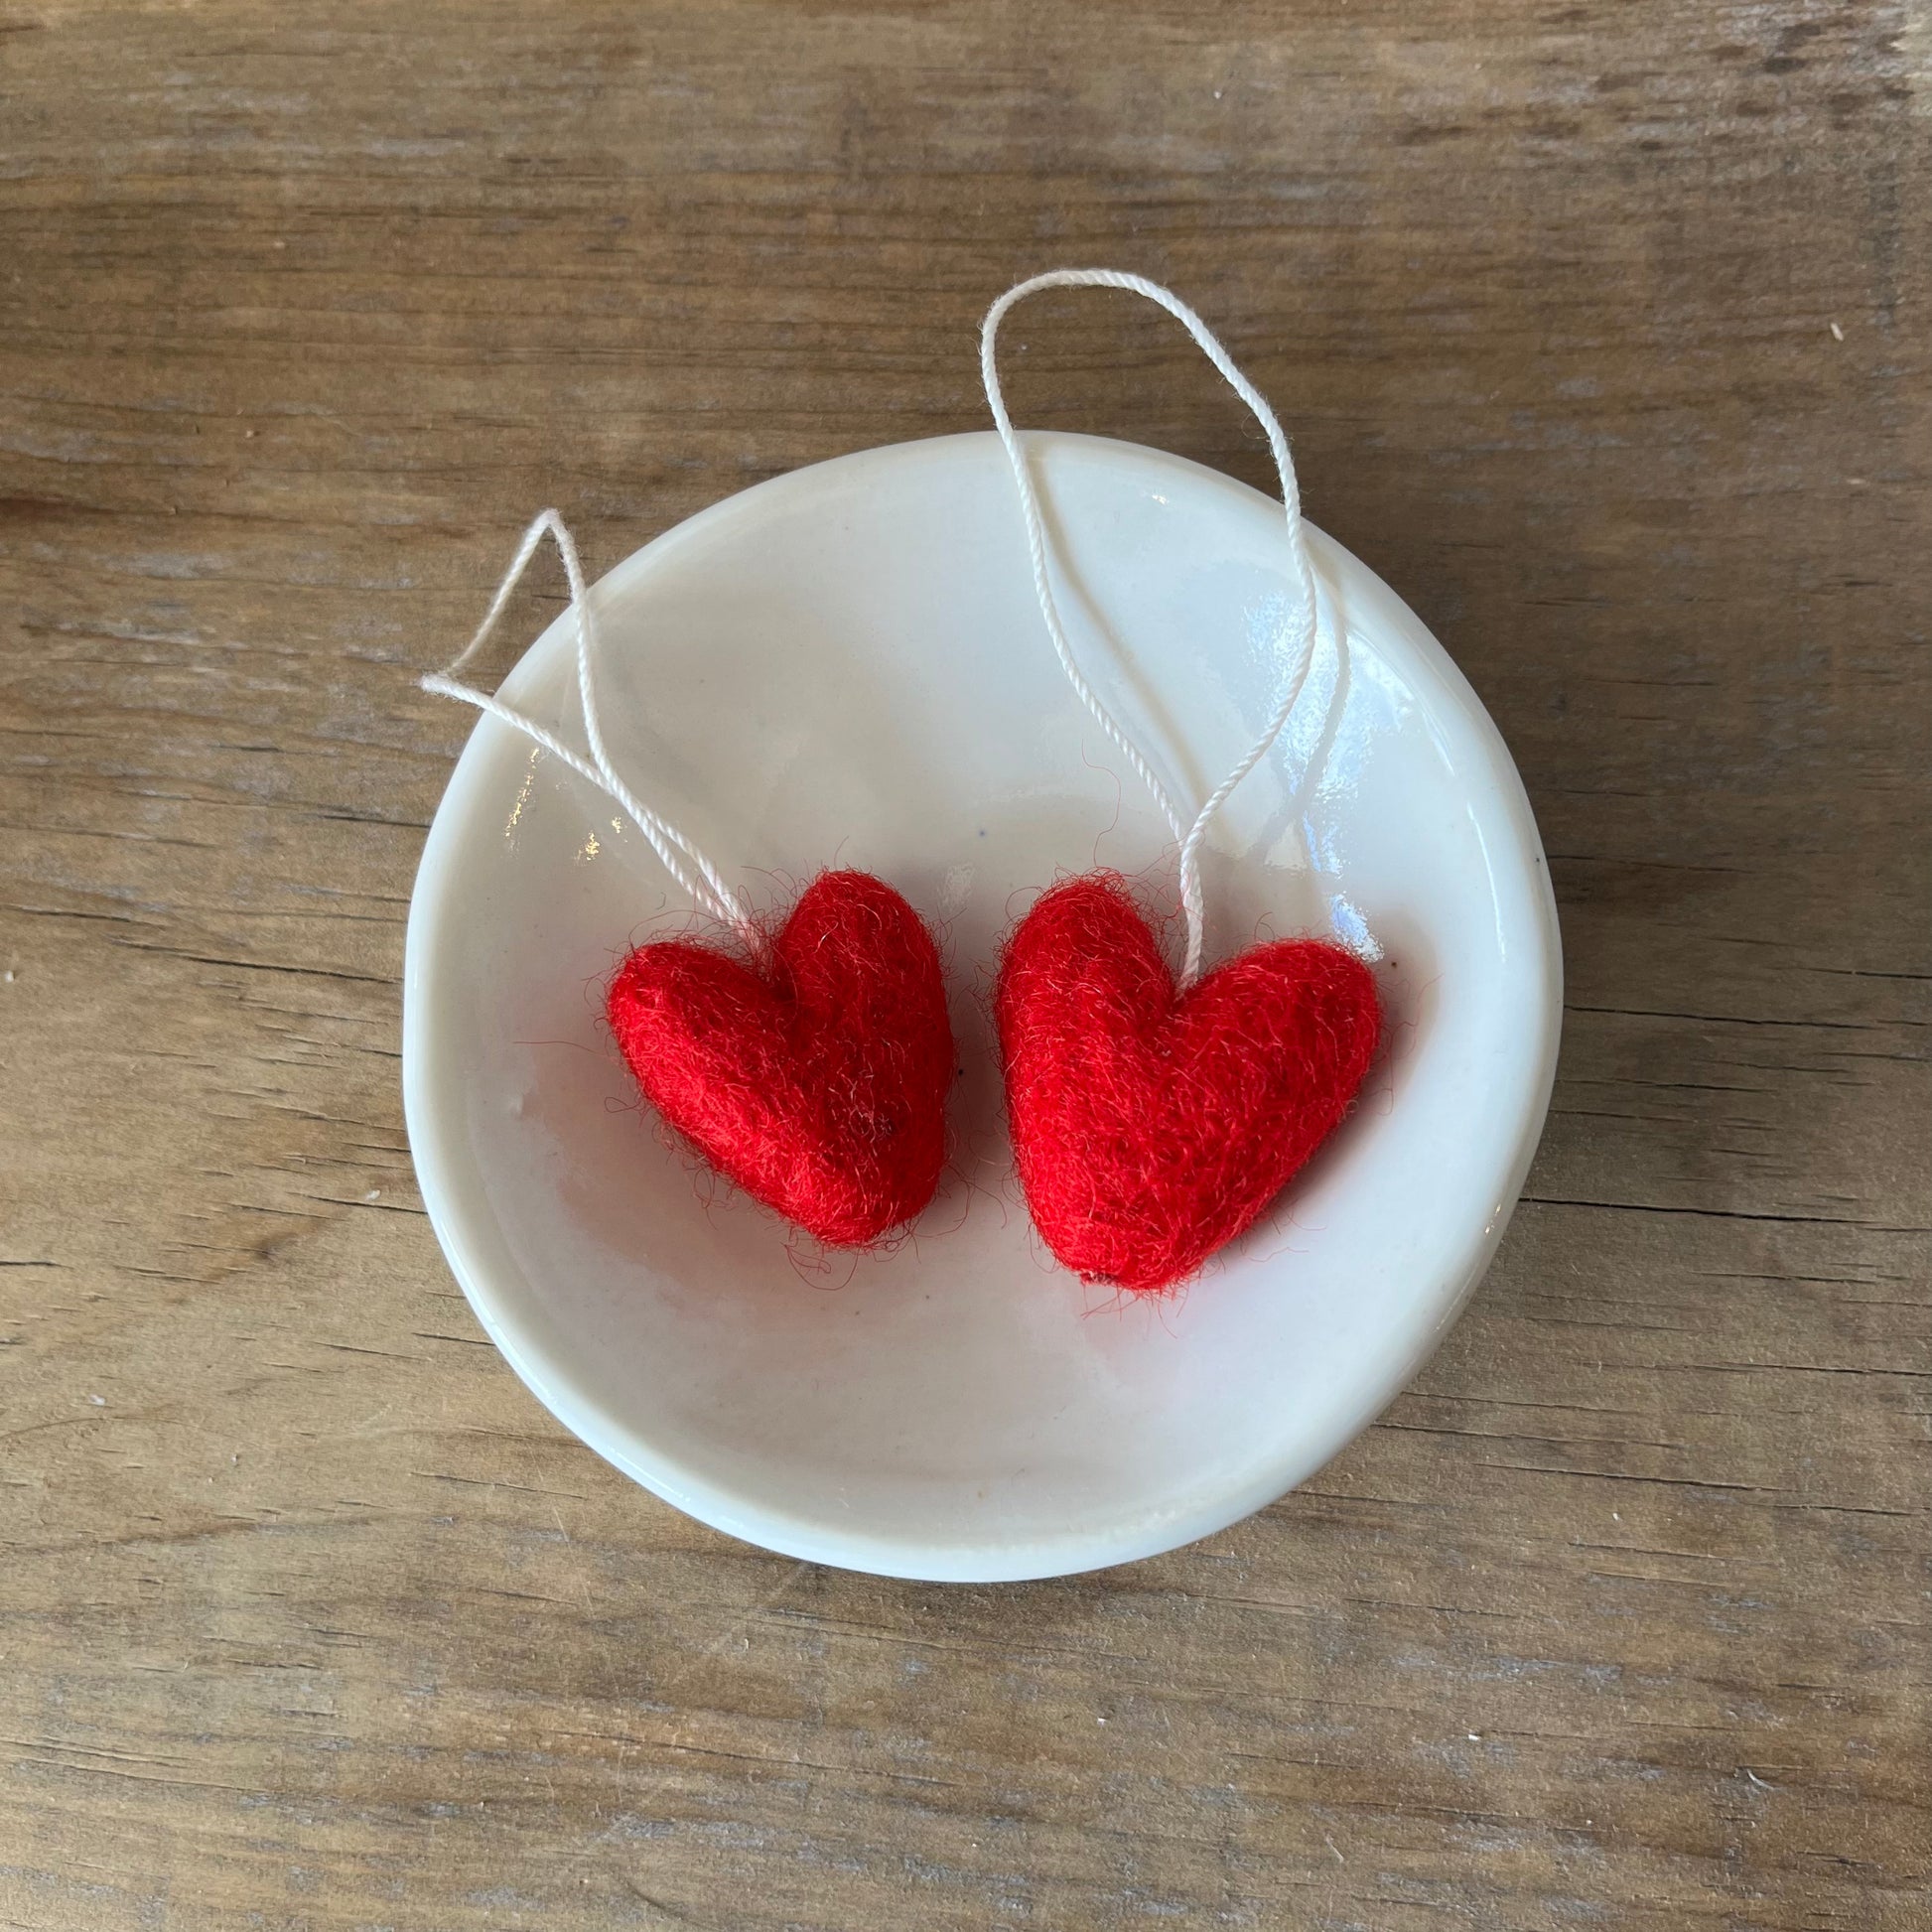 Handmade felted wool red hearts in a small bowl